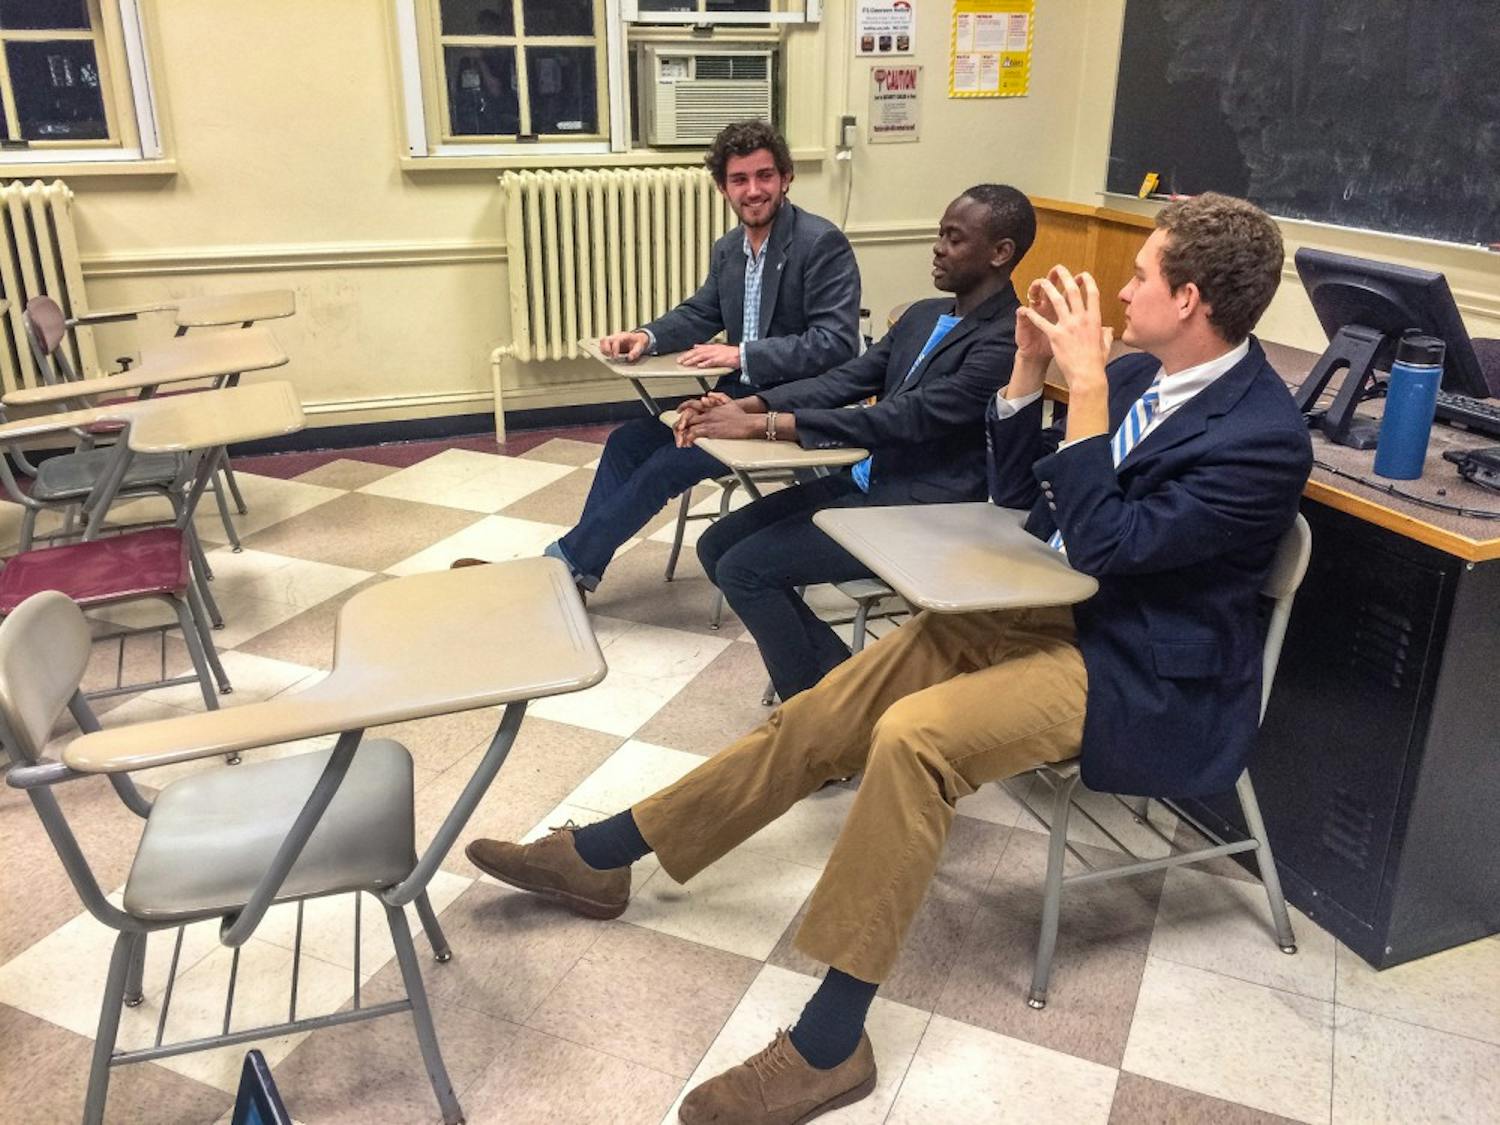 The Out-of-State Student Association hosted a debate on Monday for the Student Body President candidates.